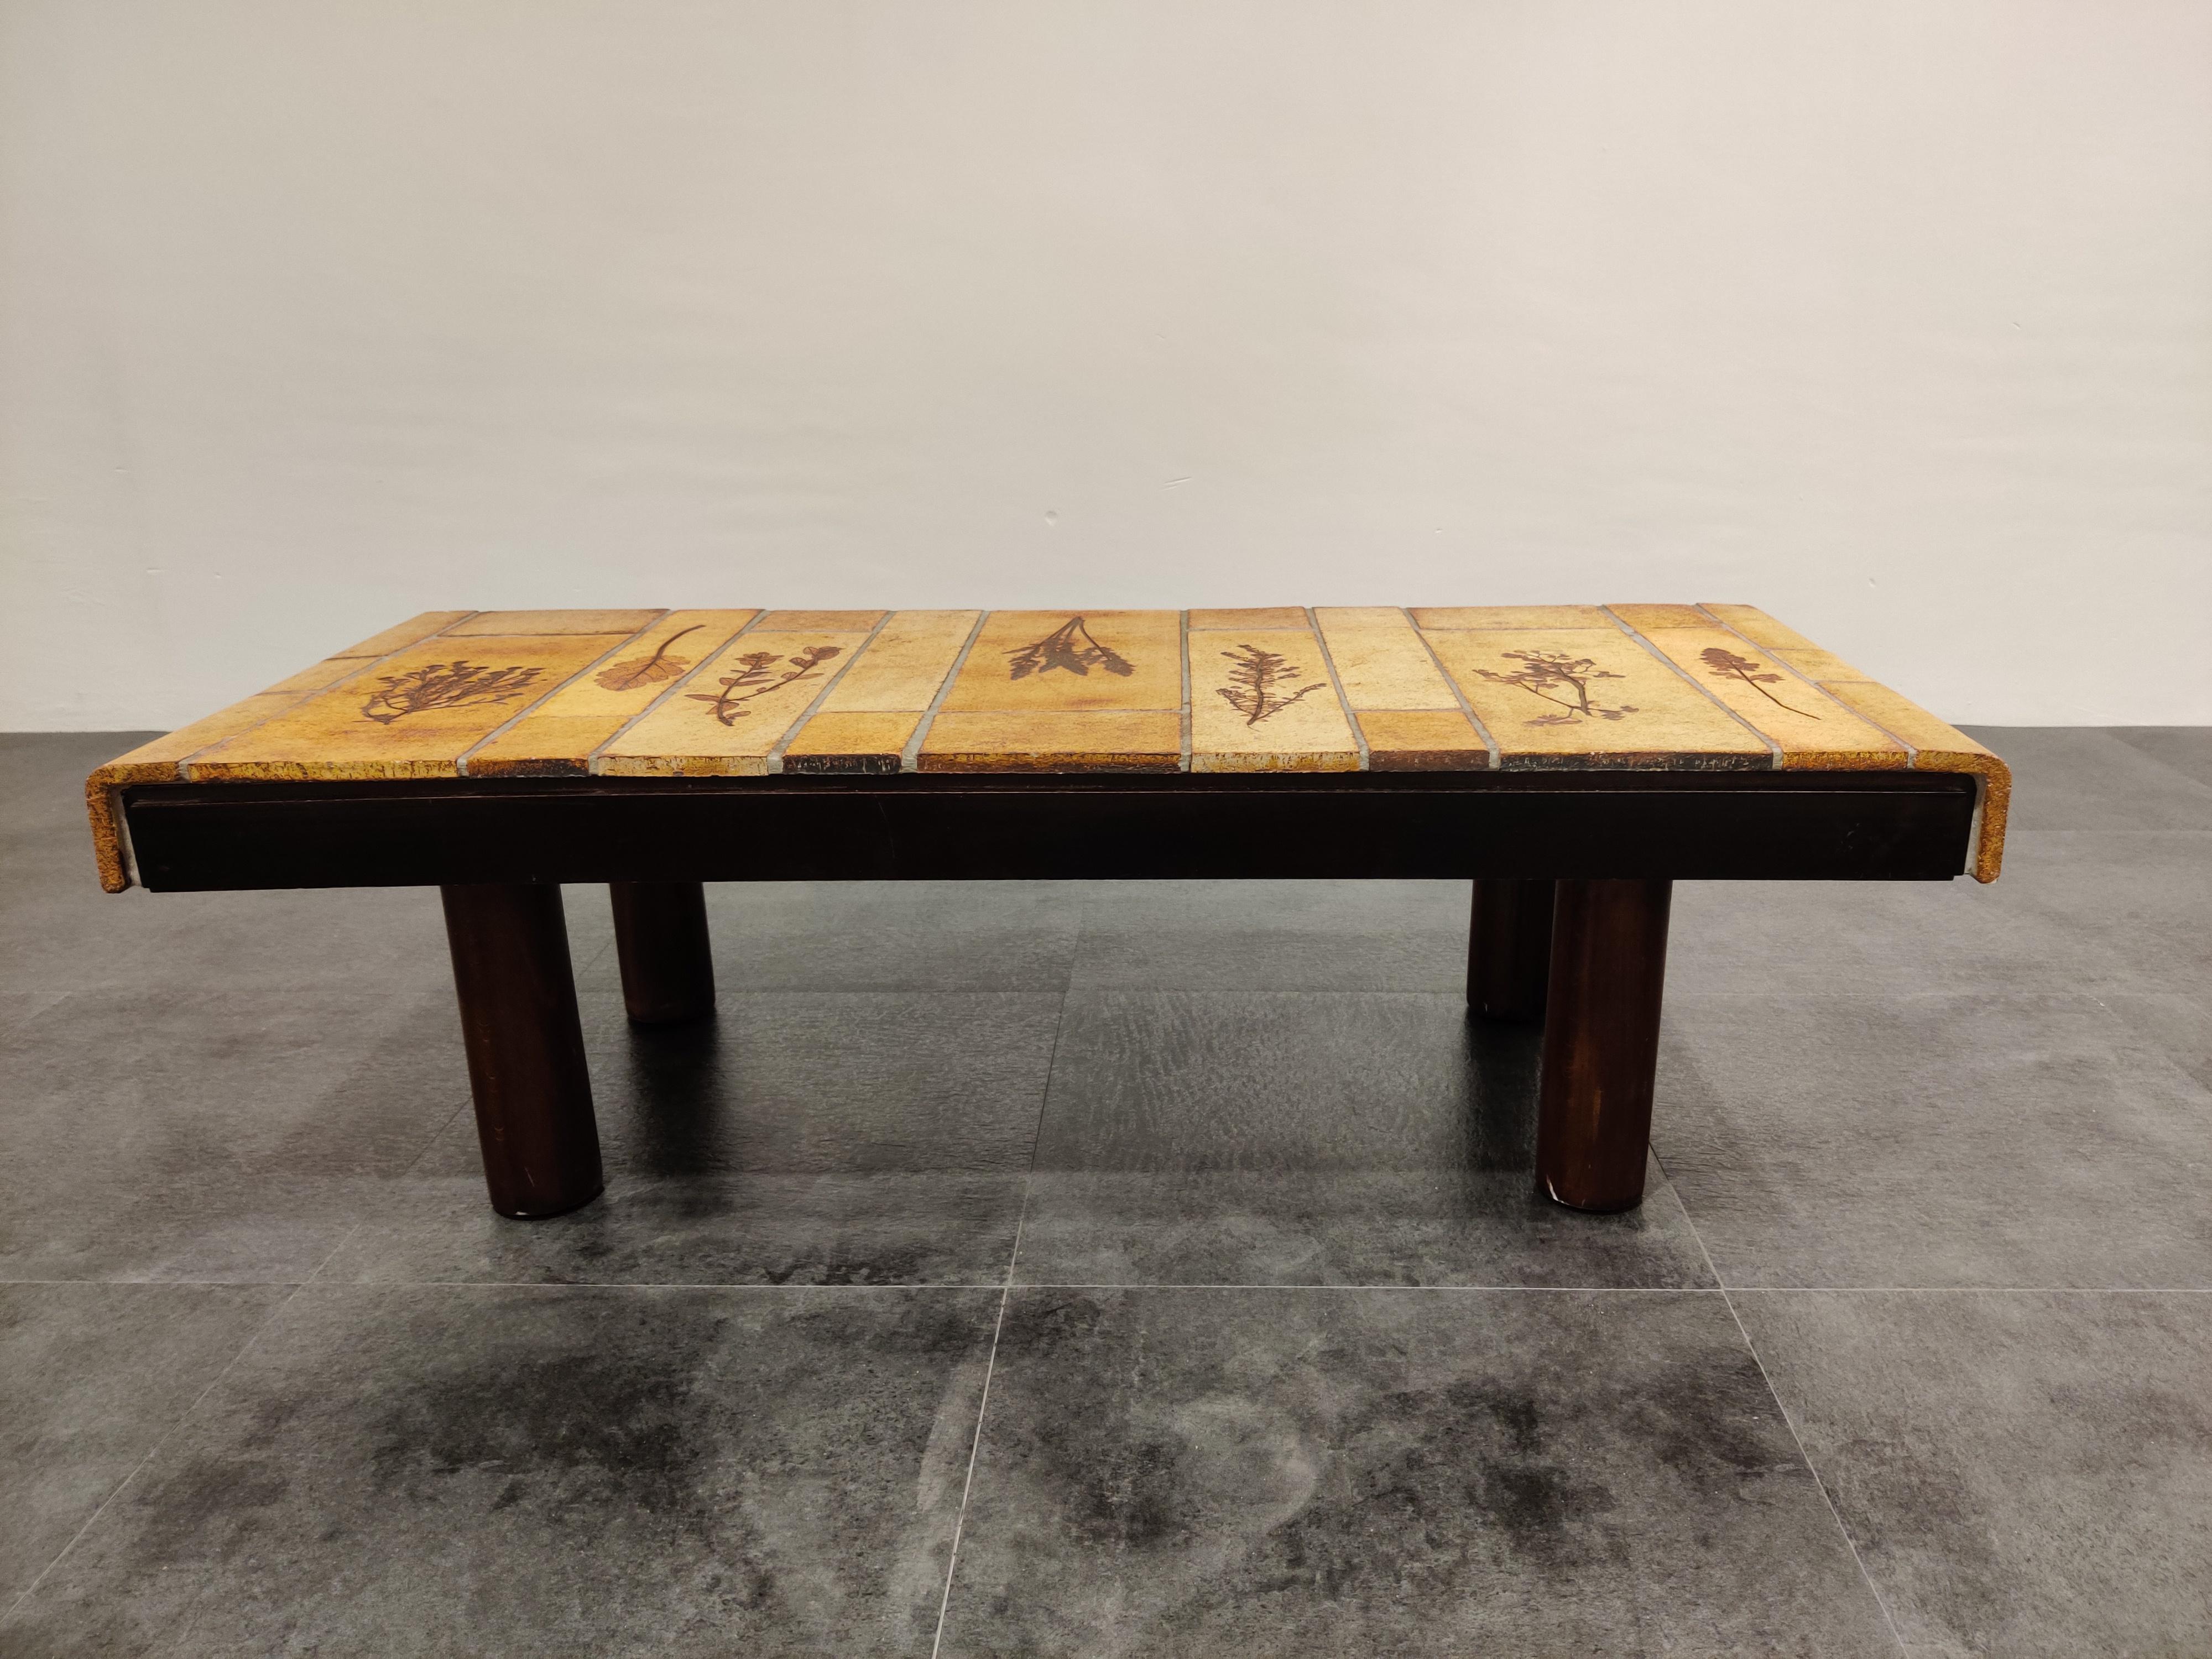 Vintage wooden coffee table made by Roger Capron (1922-2006) featuring an earthenware ceramic top with natural motives.

Round wooden legs.

Signed Roger Capron

Minimal chip on one of the corners.

1970s - France

Dimensions:
Length